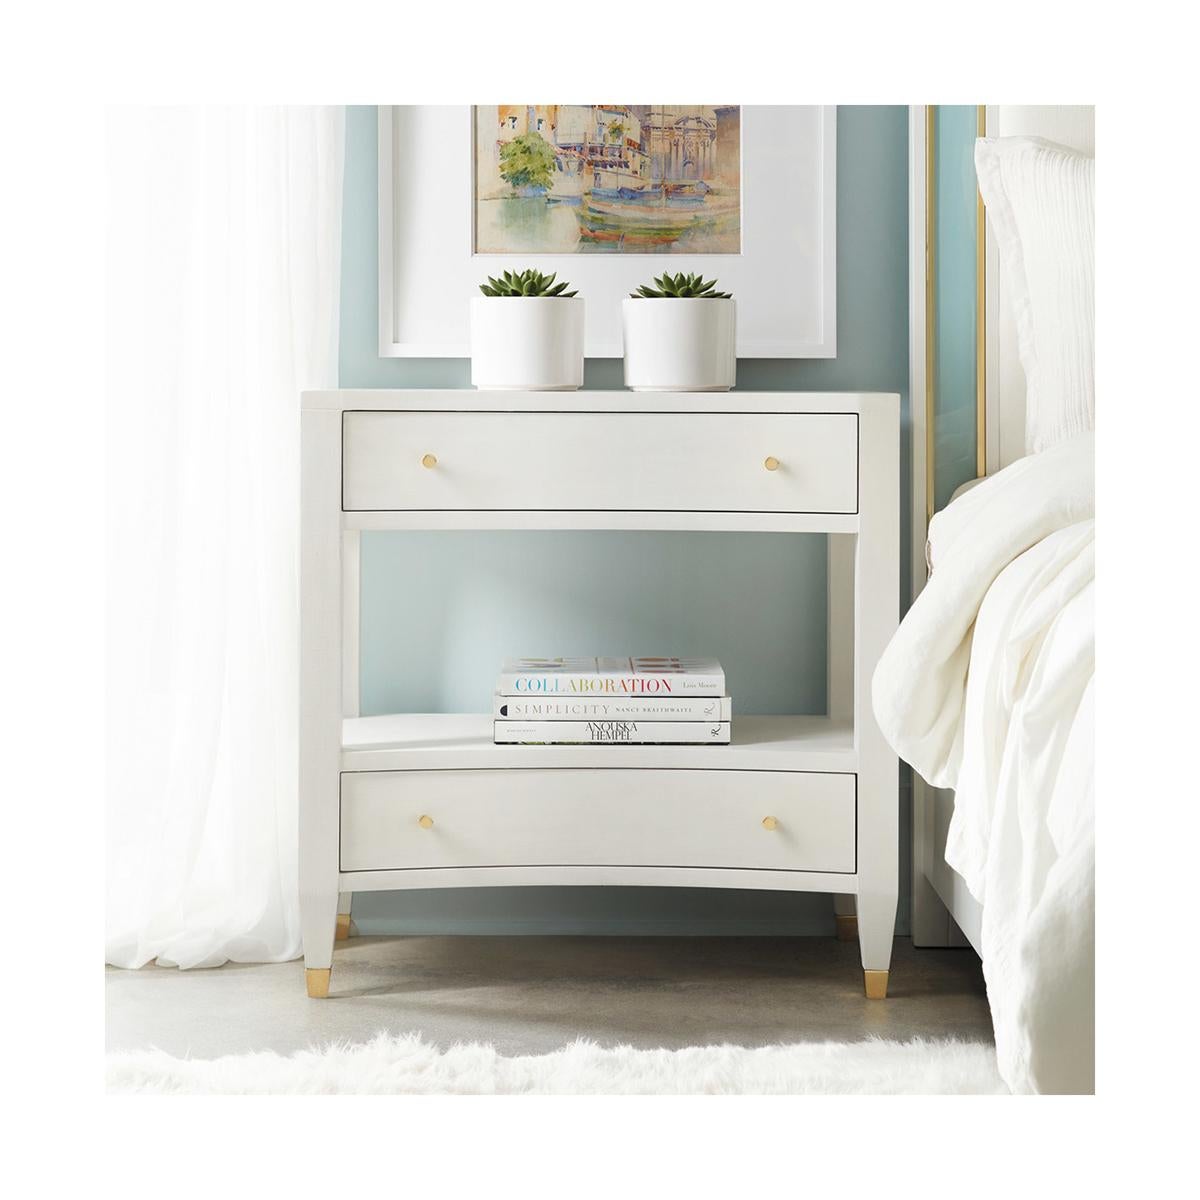 Modern White Painted Nightstand, hand painted with a white linen color, with a concave form front with two drawers and an open shelf space. Each drawer with polished brass knobs and with square tapered legs on brass feet.

Dimensions: 30